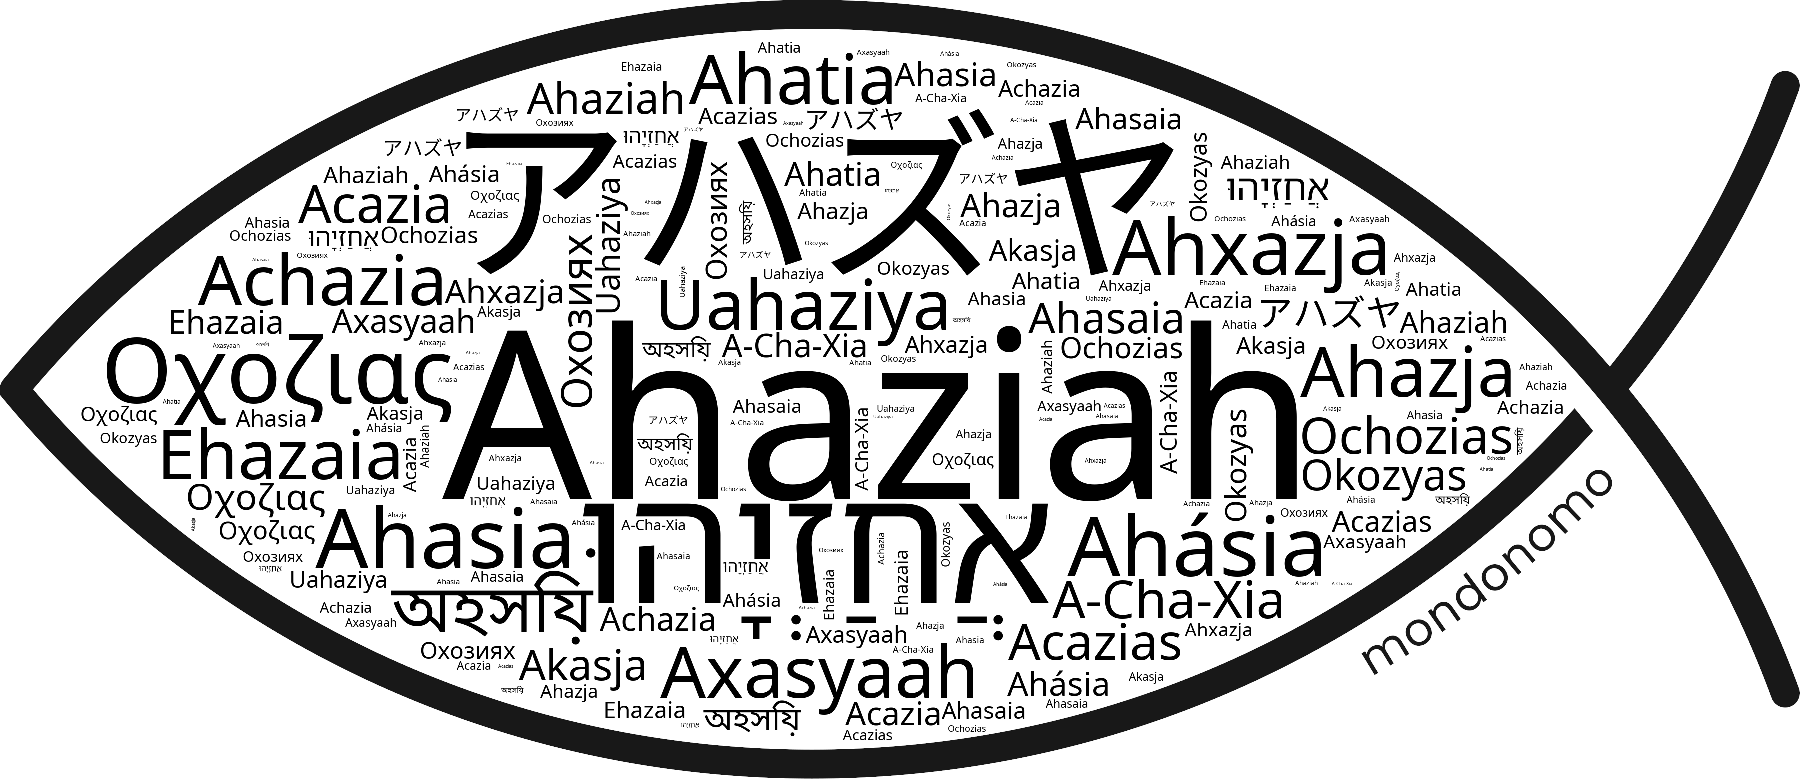 Name Ahaziah in the world's Bibles